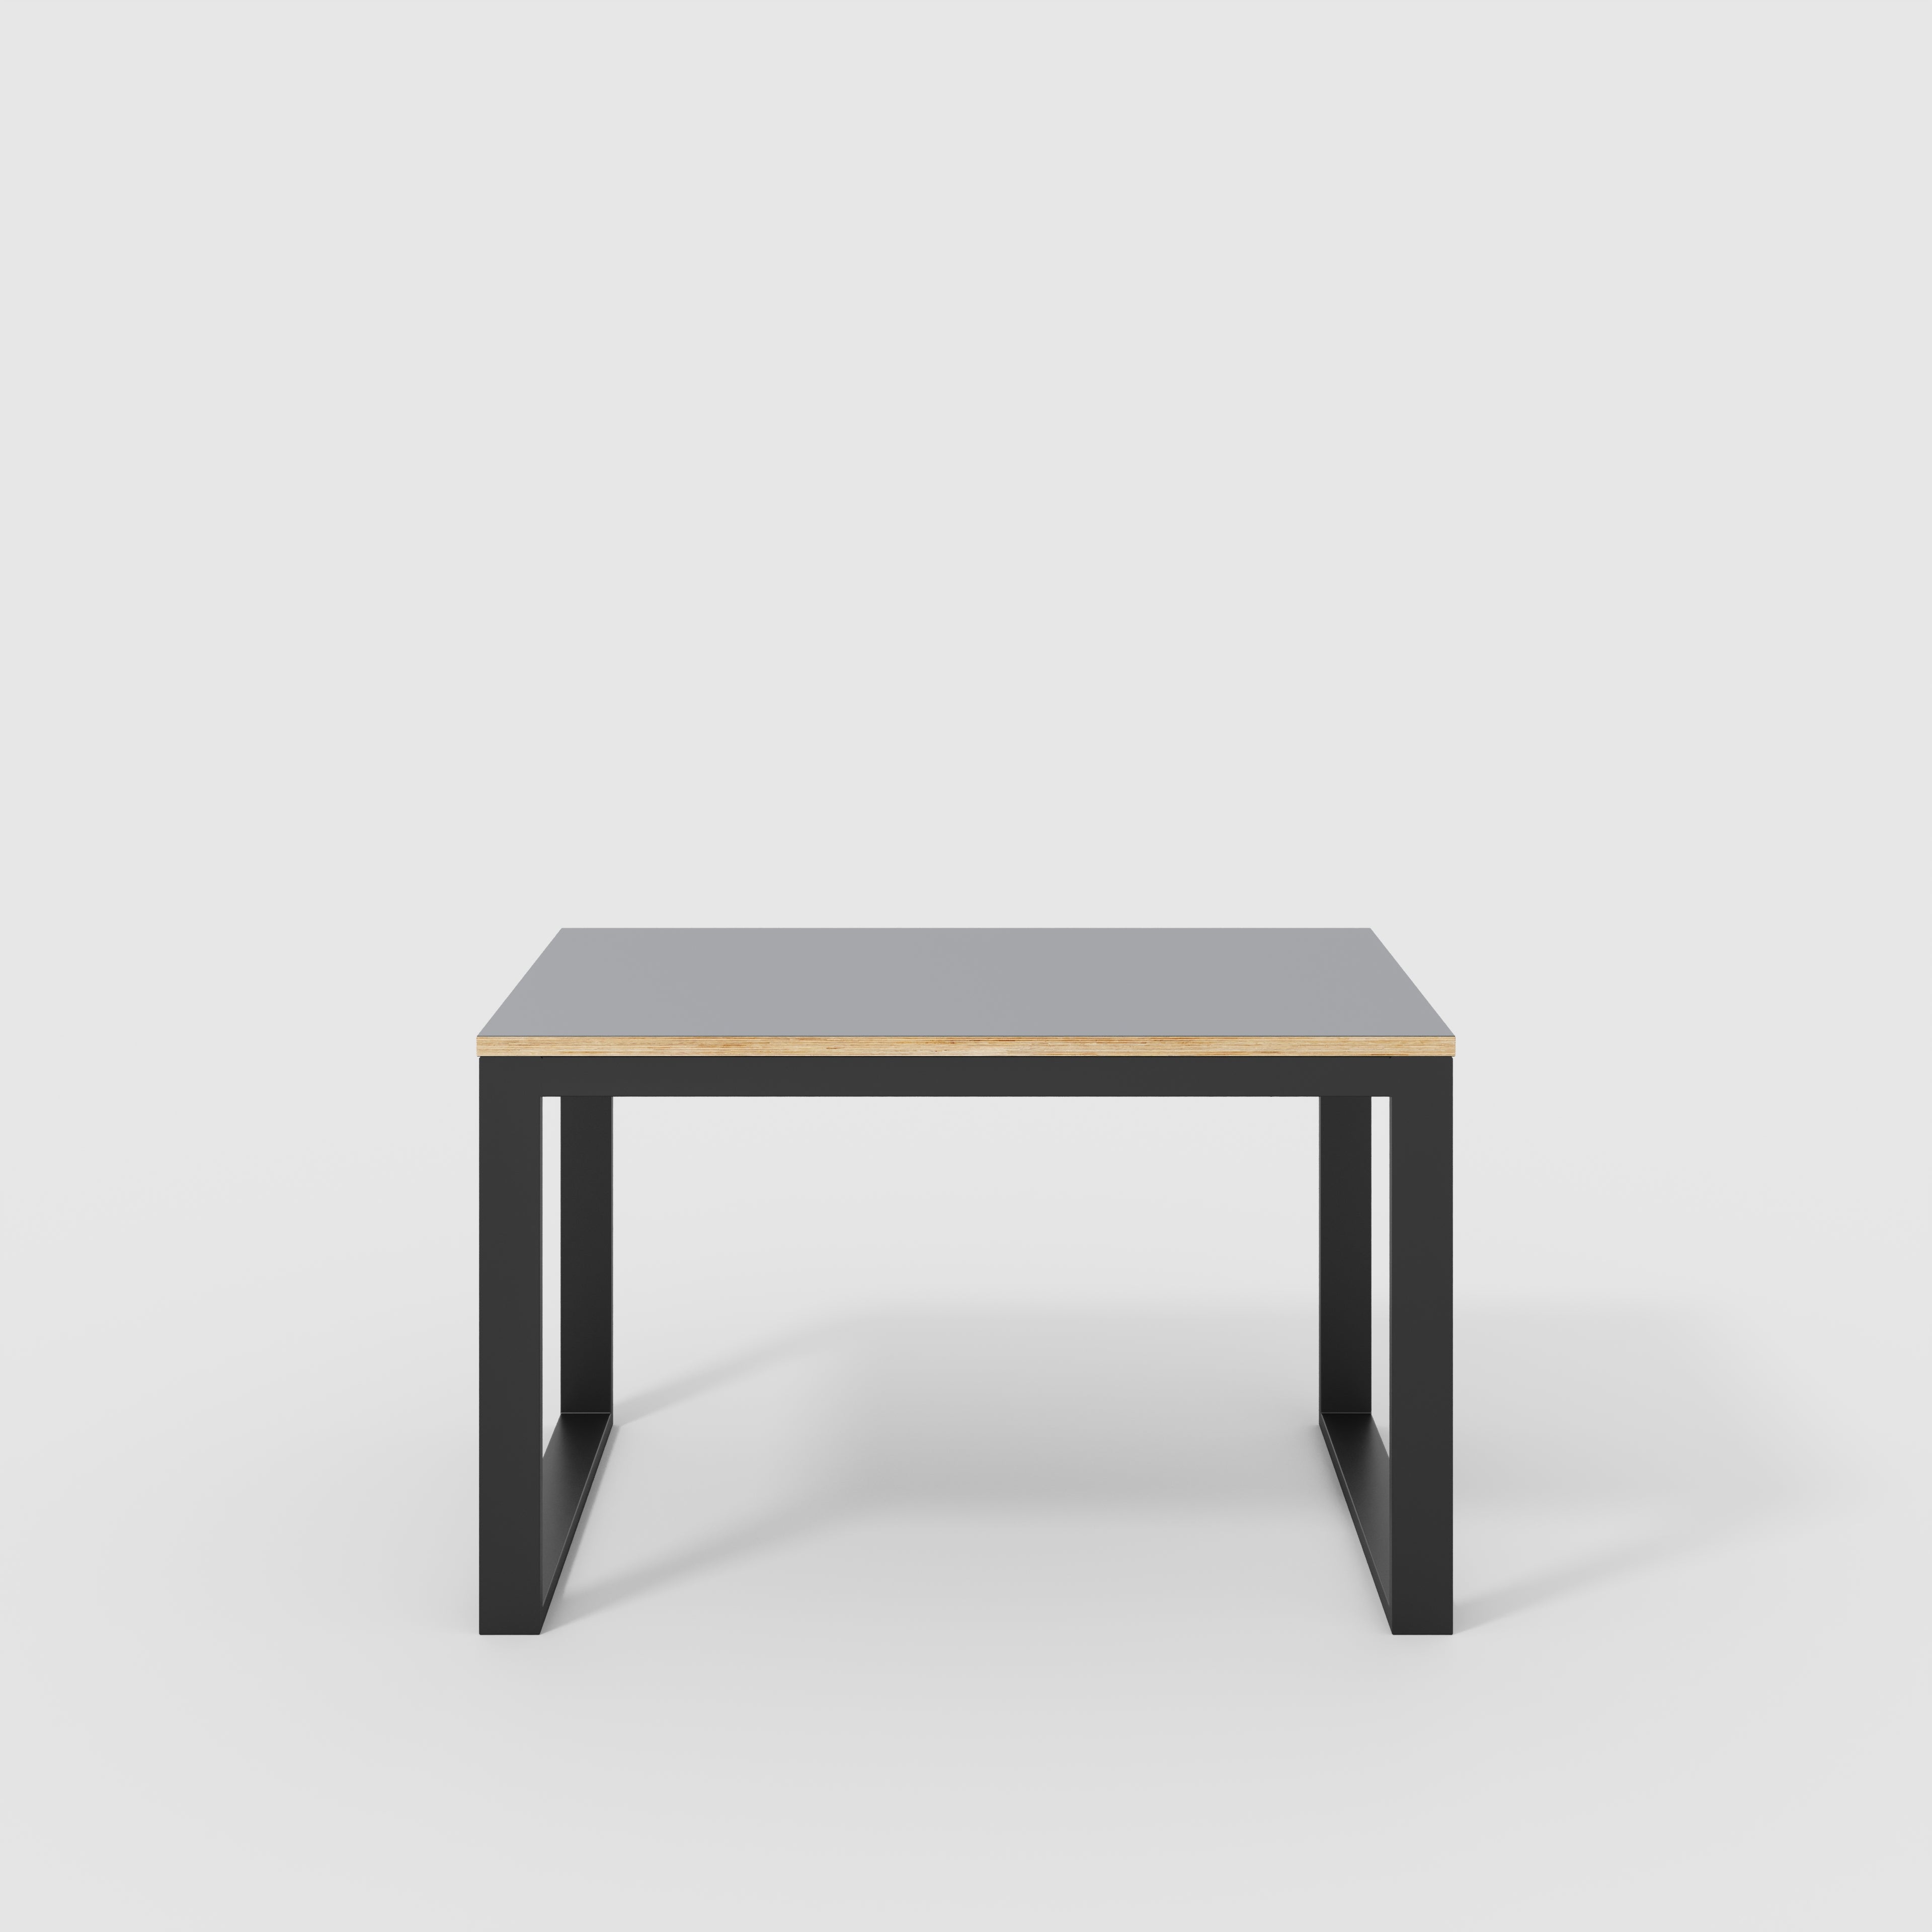 Table with Black Industrial Frame - Formica Tornado Grey - 1200(w) x 745(d) x 735(h)